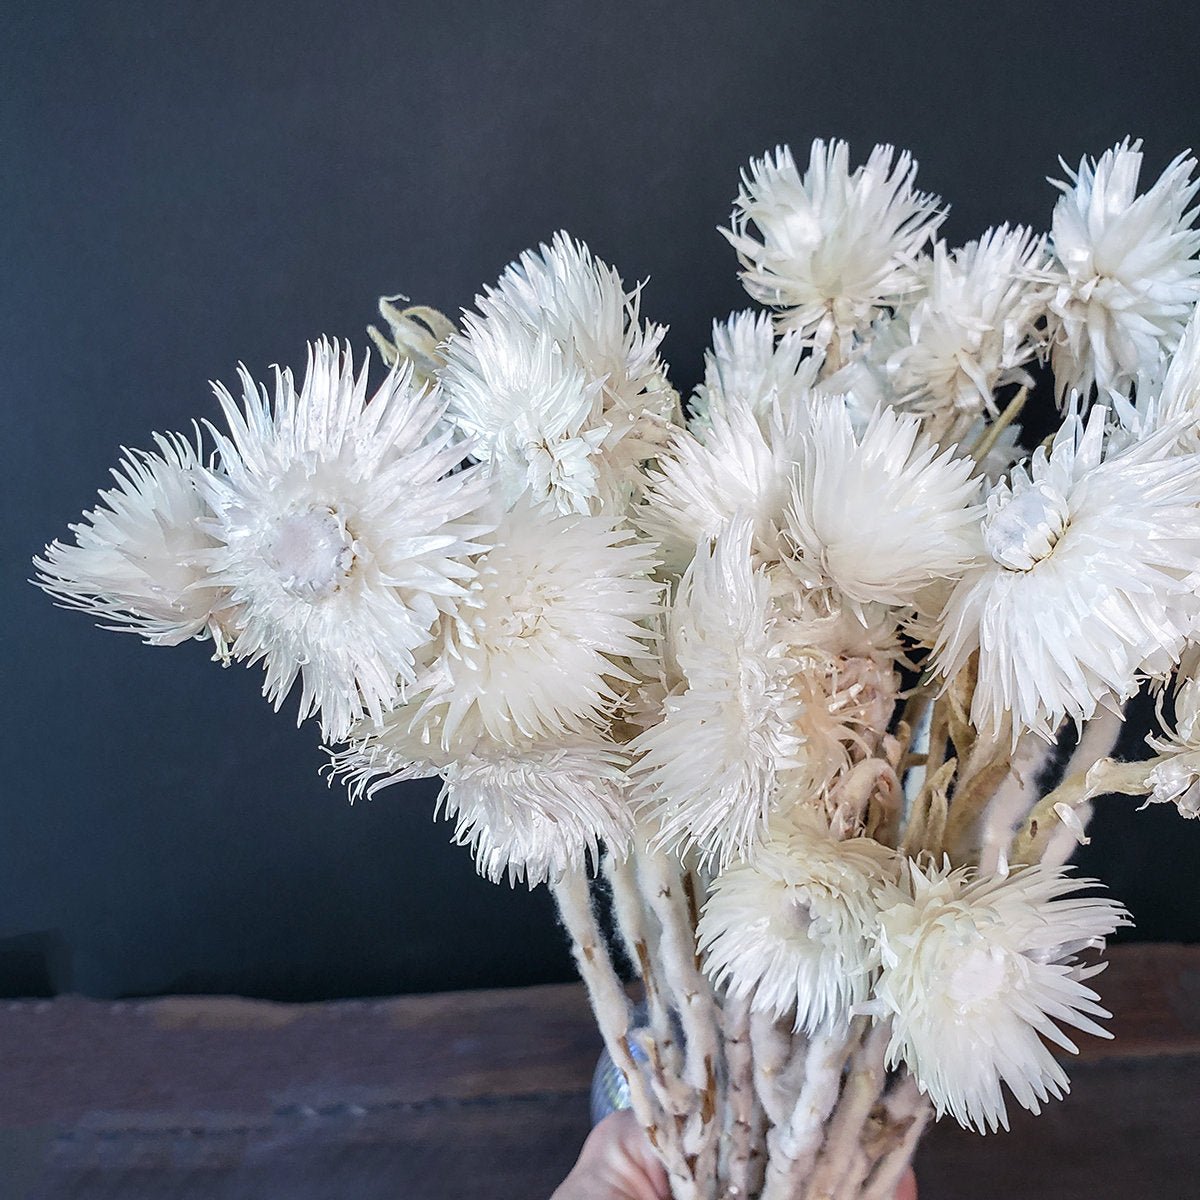 Dried White Everlasting Straw Flowers - Mossy Moss by Olia